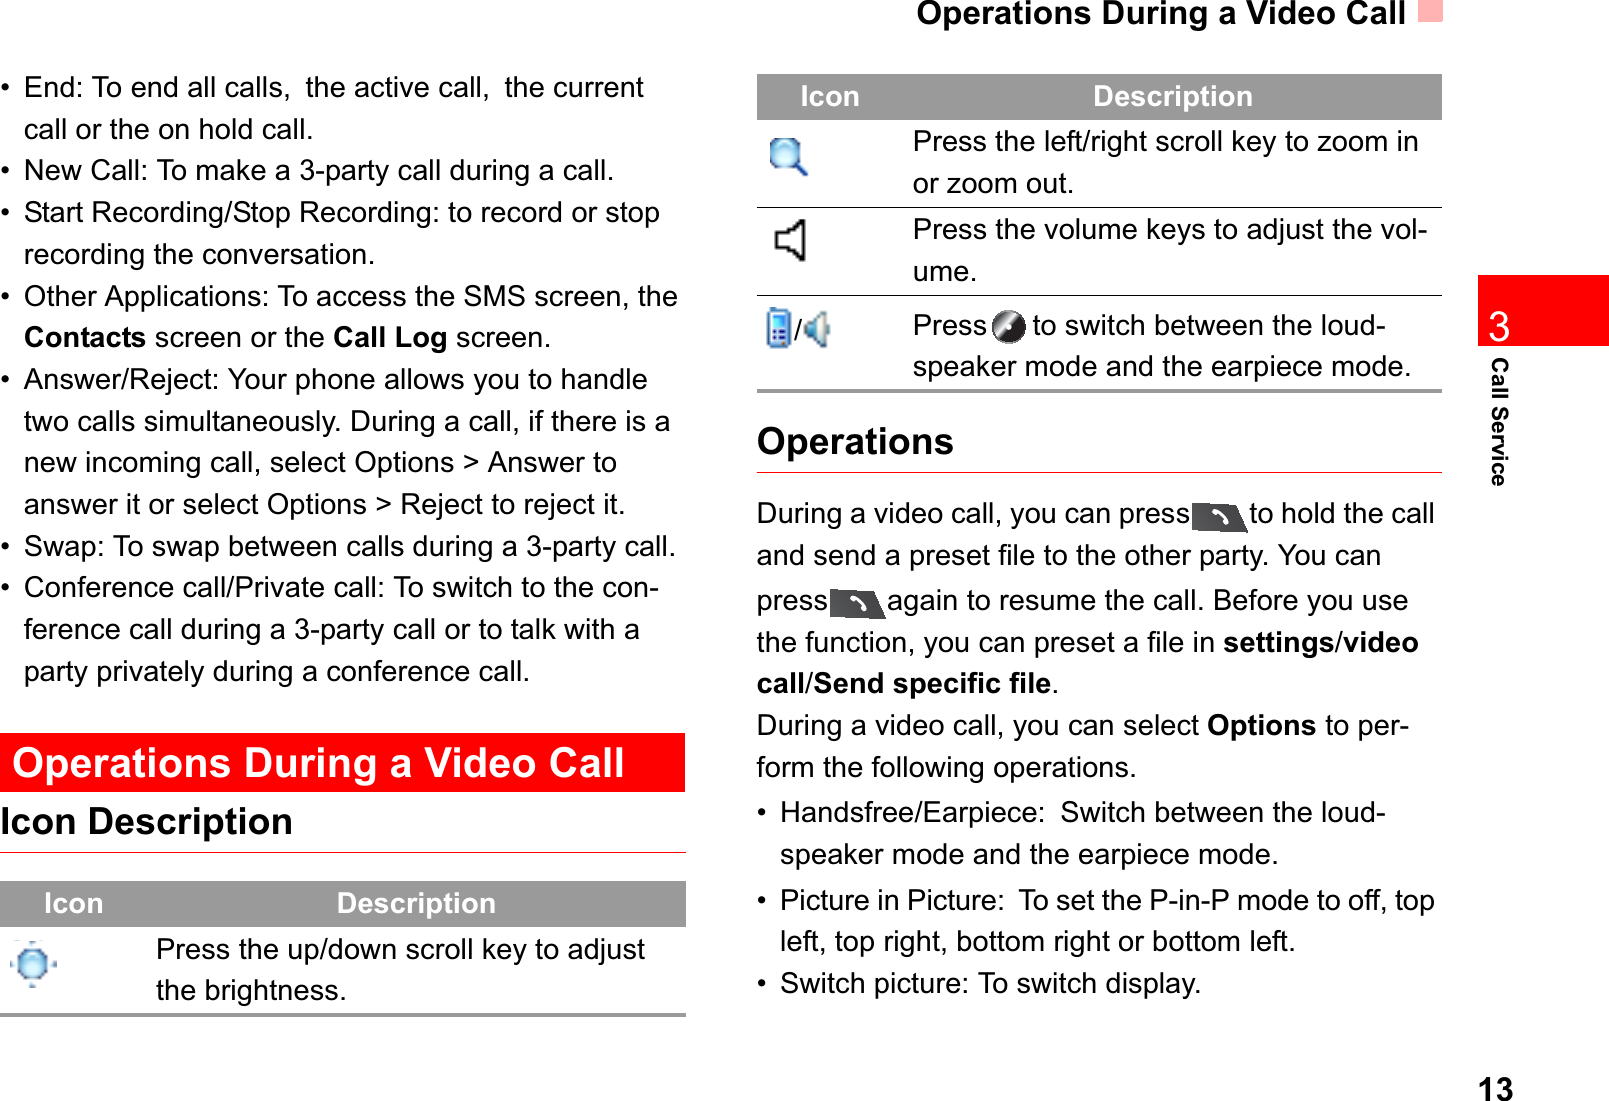 Operations During a Video Call13Call Service3• End: To end all calls,the active call,the current call or the on hold call.• New Call: To make a 3-party call during a call.• Start Recording/Stop Recording: to record or stop recording the conversation.• Other Applications: To access the SMS screen, the Contacts screen or the Call Log screen.• Answer/Reject: Your phone allows you to handle two calls simultaneously. During a call, if there is a new incoming call, select Options &gt; Answer to answer it or select Options &gt; Reject to reject it.• Swap: To swap between calls during a 3-party call.• Conference call/Private call: To switch to the con-ference call during a 3-party call or to talk with a party privately during a conference call.Operations During a Video CallIcon DescriptionOperationsDuring a video call, you can press to hold the call and send a preset file to the other party. You can press again to resume the call. Before you use the function, you can preset a file in settings/videocall/Send specific file.During a video call, you can select Options to per-form the following operations.• Handsfree/Earpiece:Switch between the loud-speaker mode and the earpiece mode.• Picture in Picture:To set the P-in-P mode to off, top left, top right, bottom right or bottom left.• Switch picture: To switch display.Icon DescriptionPress the up/down scroll key to adjust the brightness.Press the left/right scroll key to zoom in or zoom out.Press the volume keys to adjust the vol-ume./Press to switch between the loud-speaker mode and the earpiece mode.Icon Description